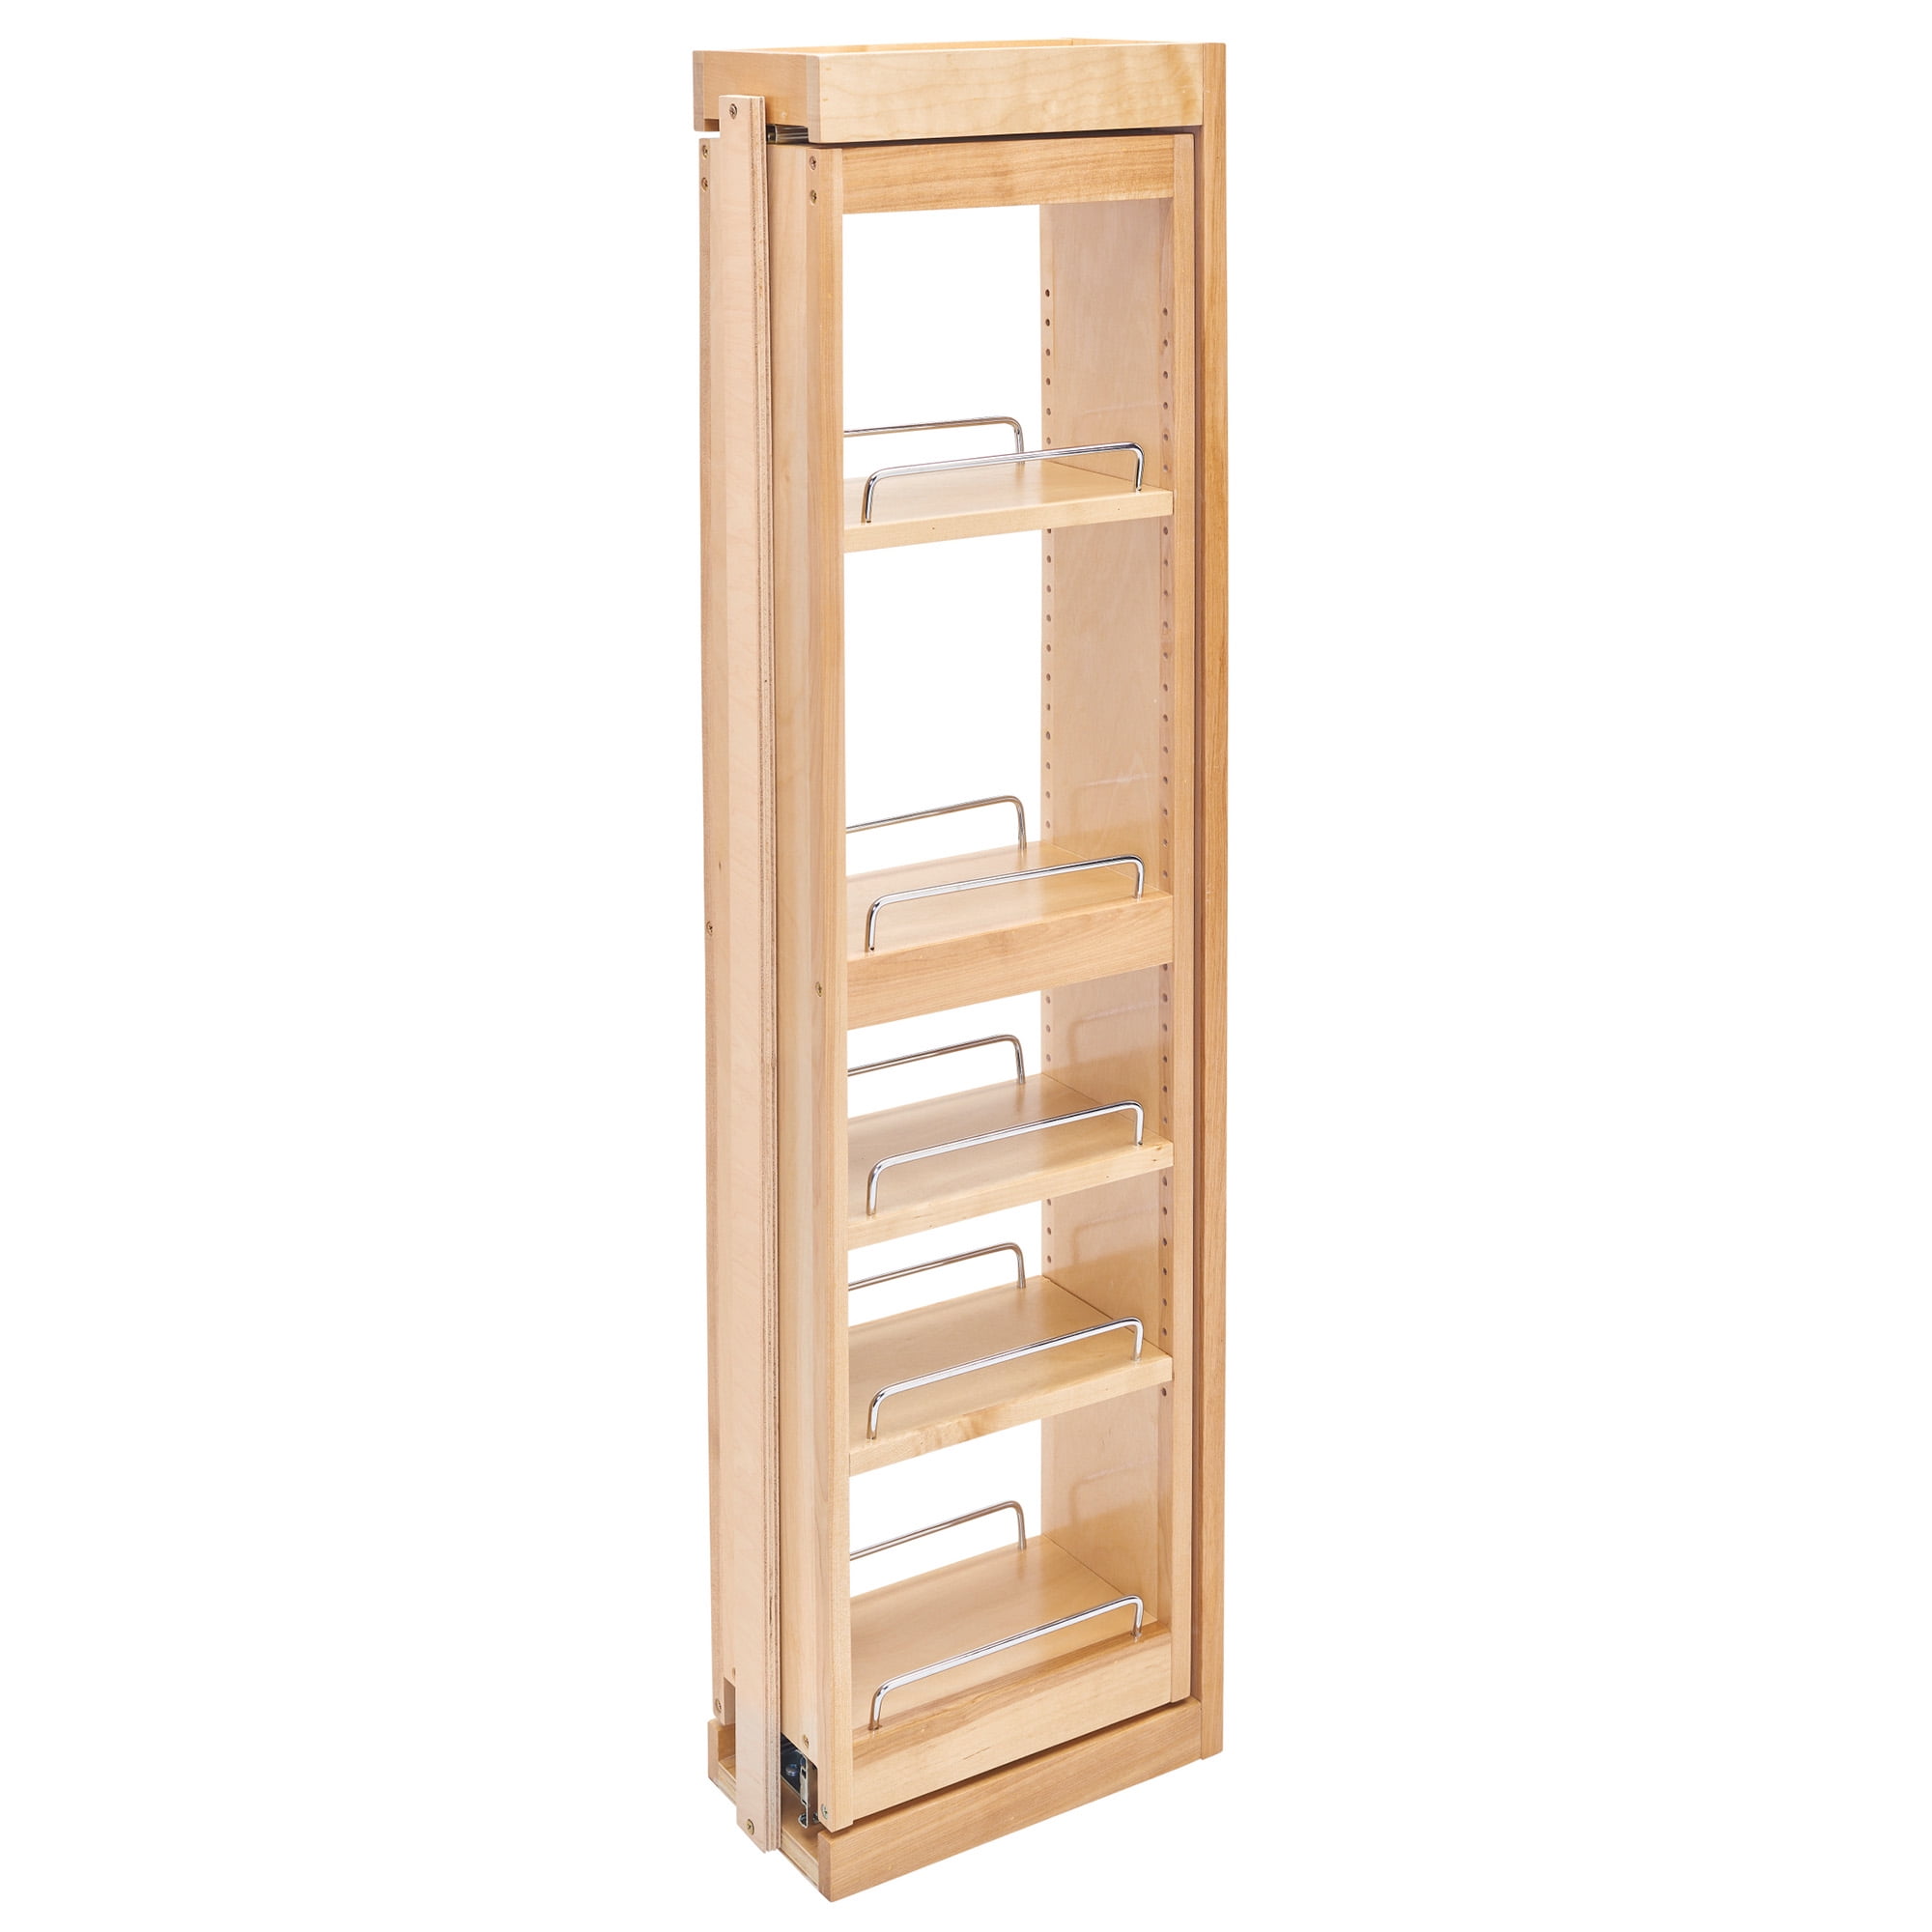 19 3-Tier Pull Out Base Cabinet Organizer (Wood), 448-BC19-8C (Rev A Shelf)